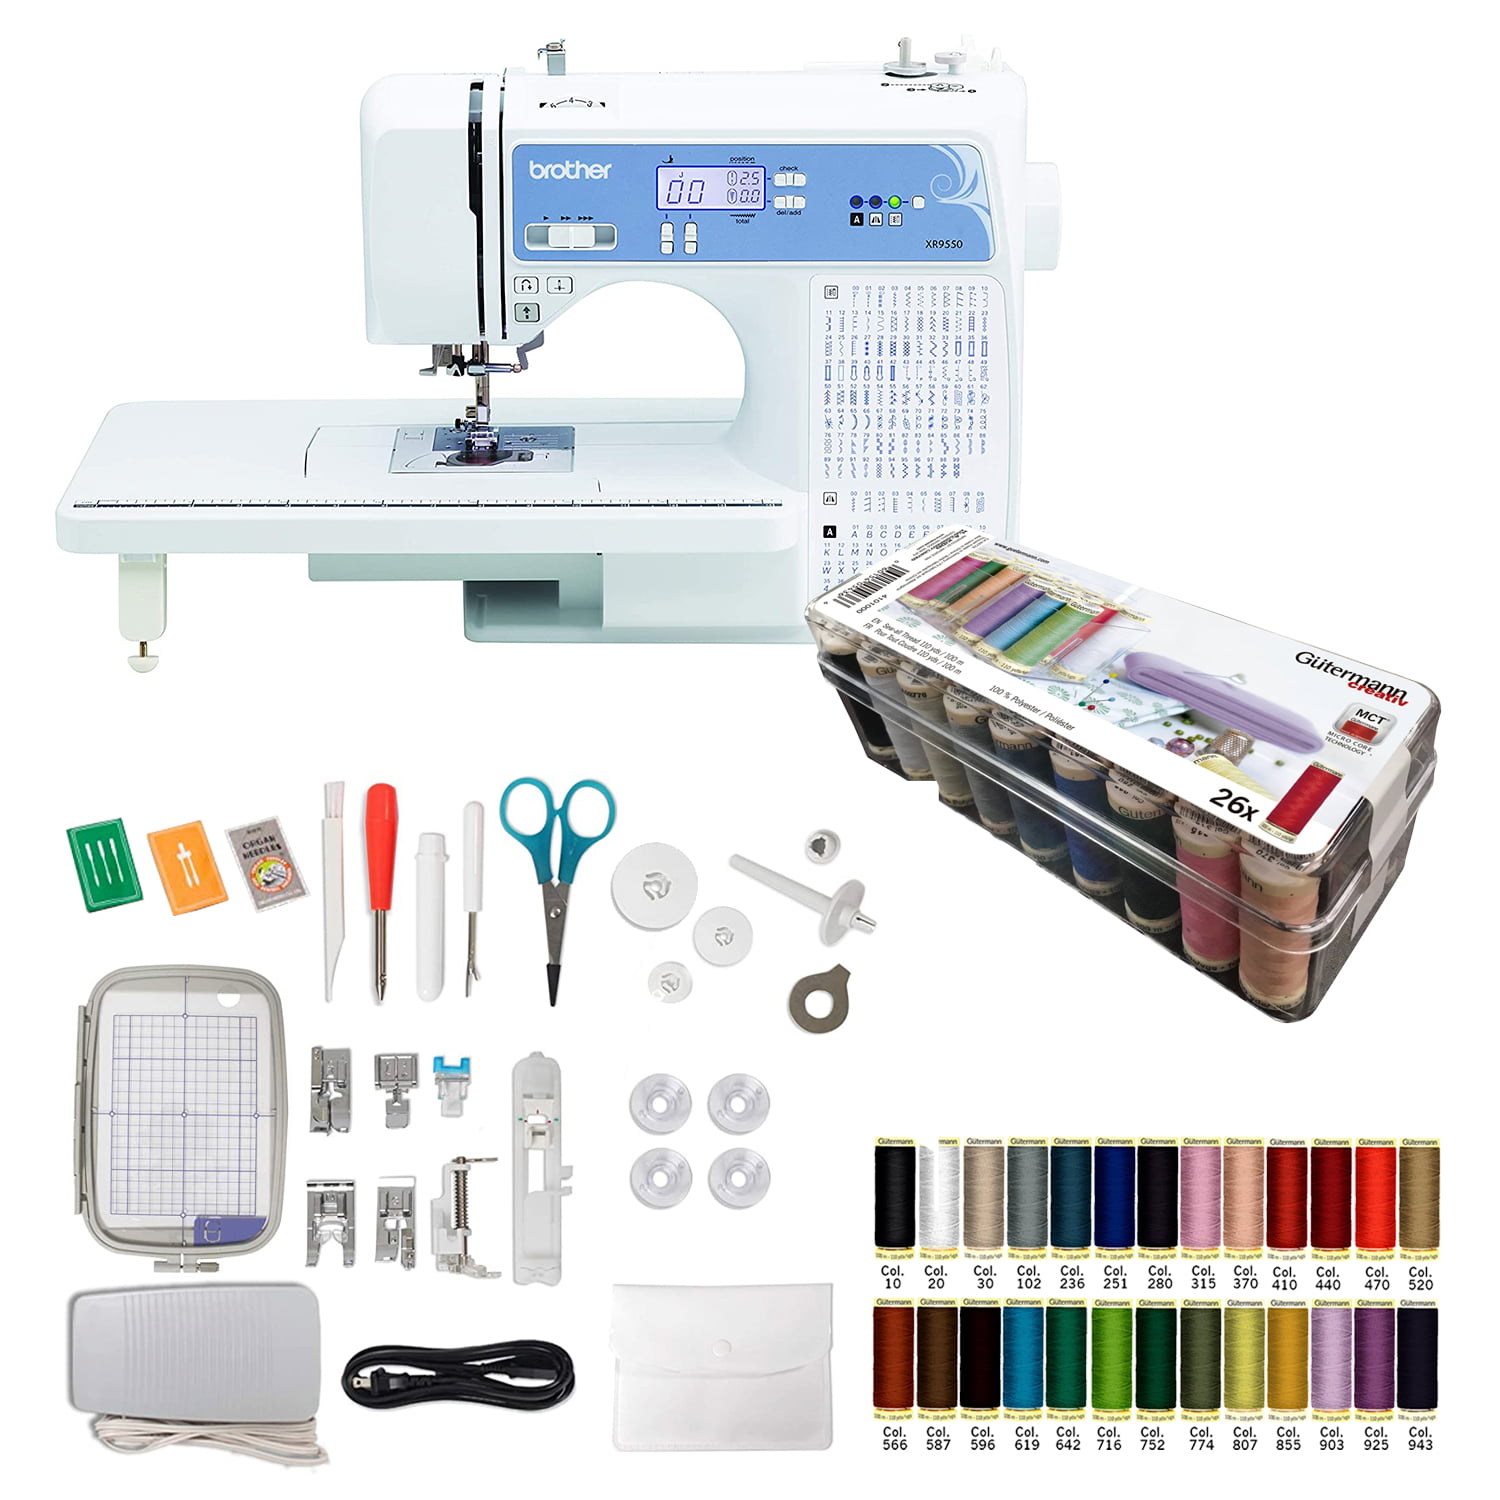 Sewing Starter Kit - Brother XR9550 Computerized Sewing Machine, LCD Screen  + 26 Gutermann Sewing Thread 100m Spools 